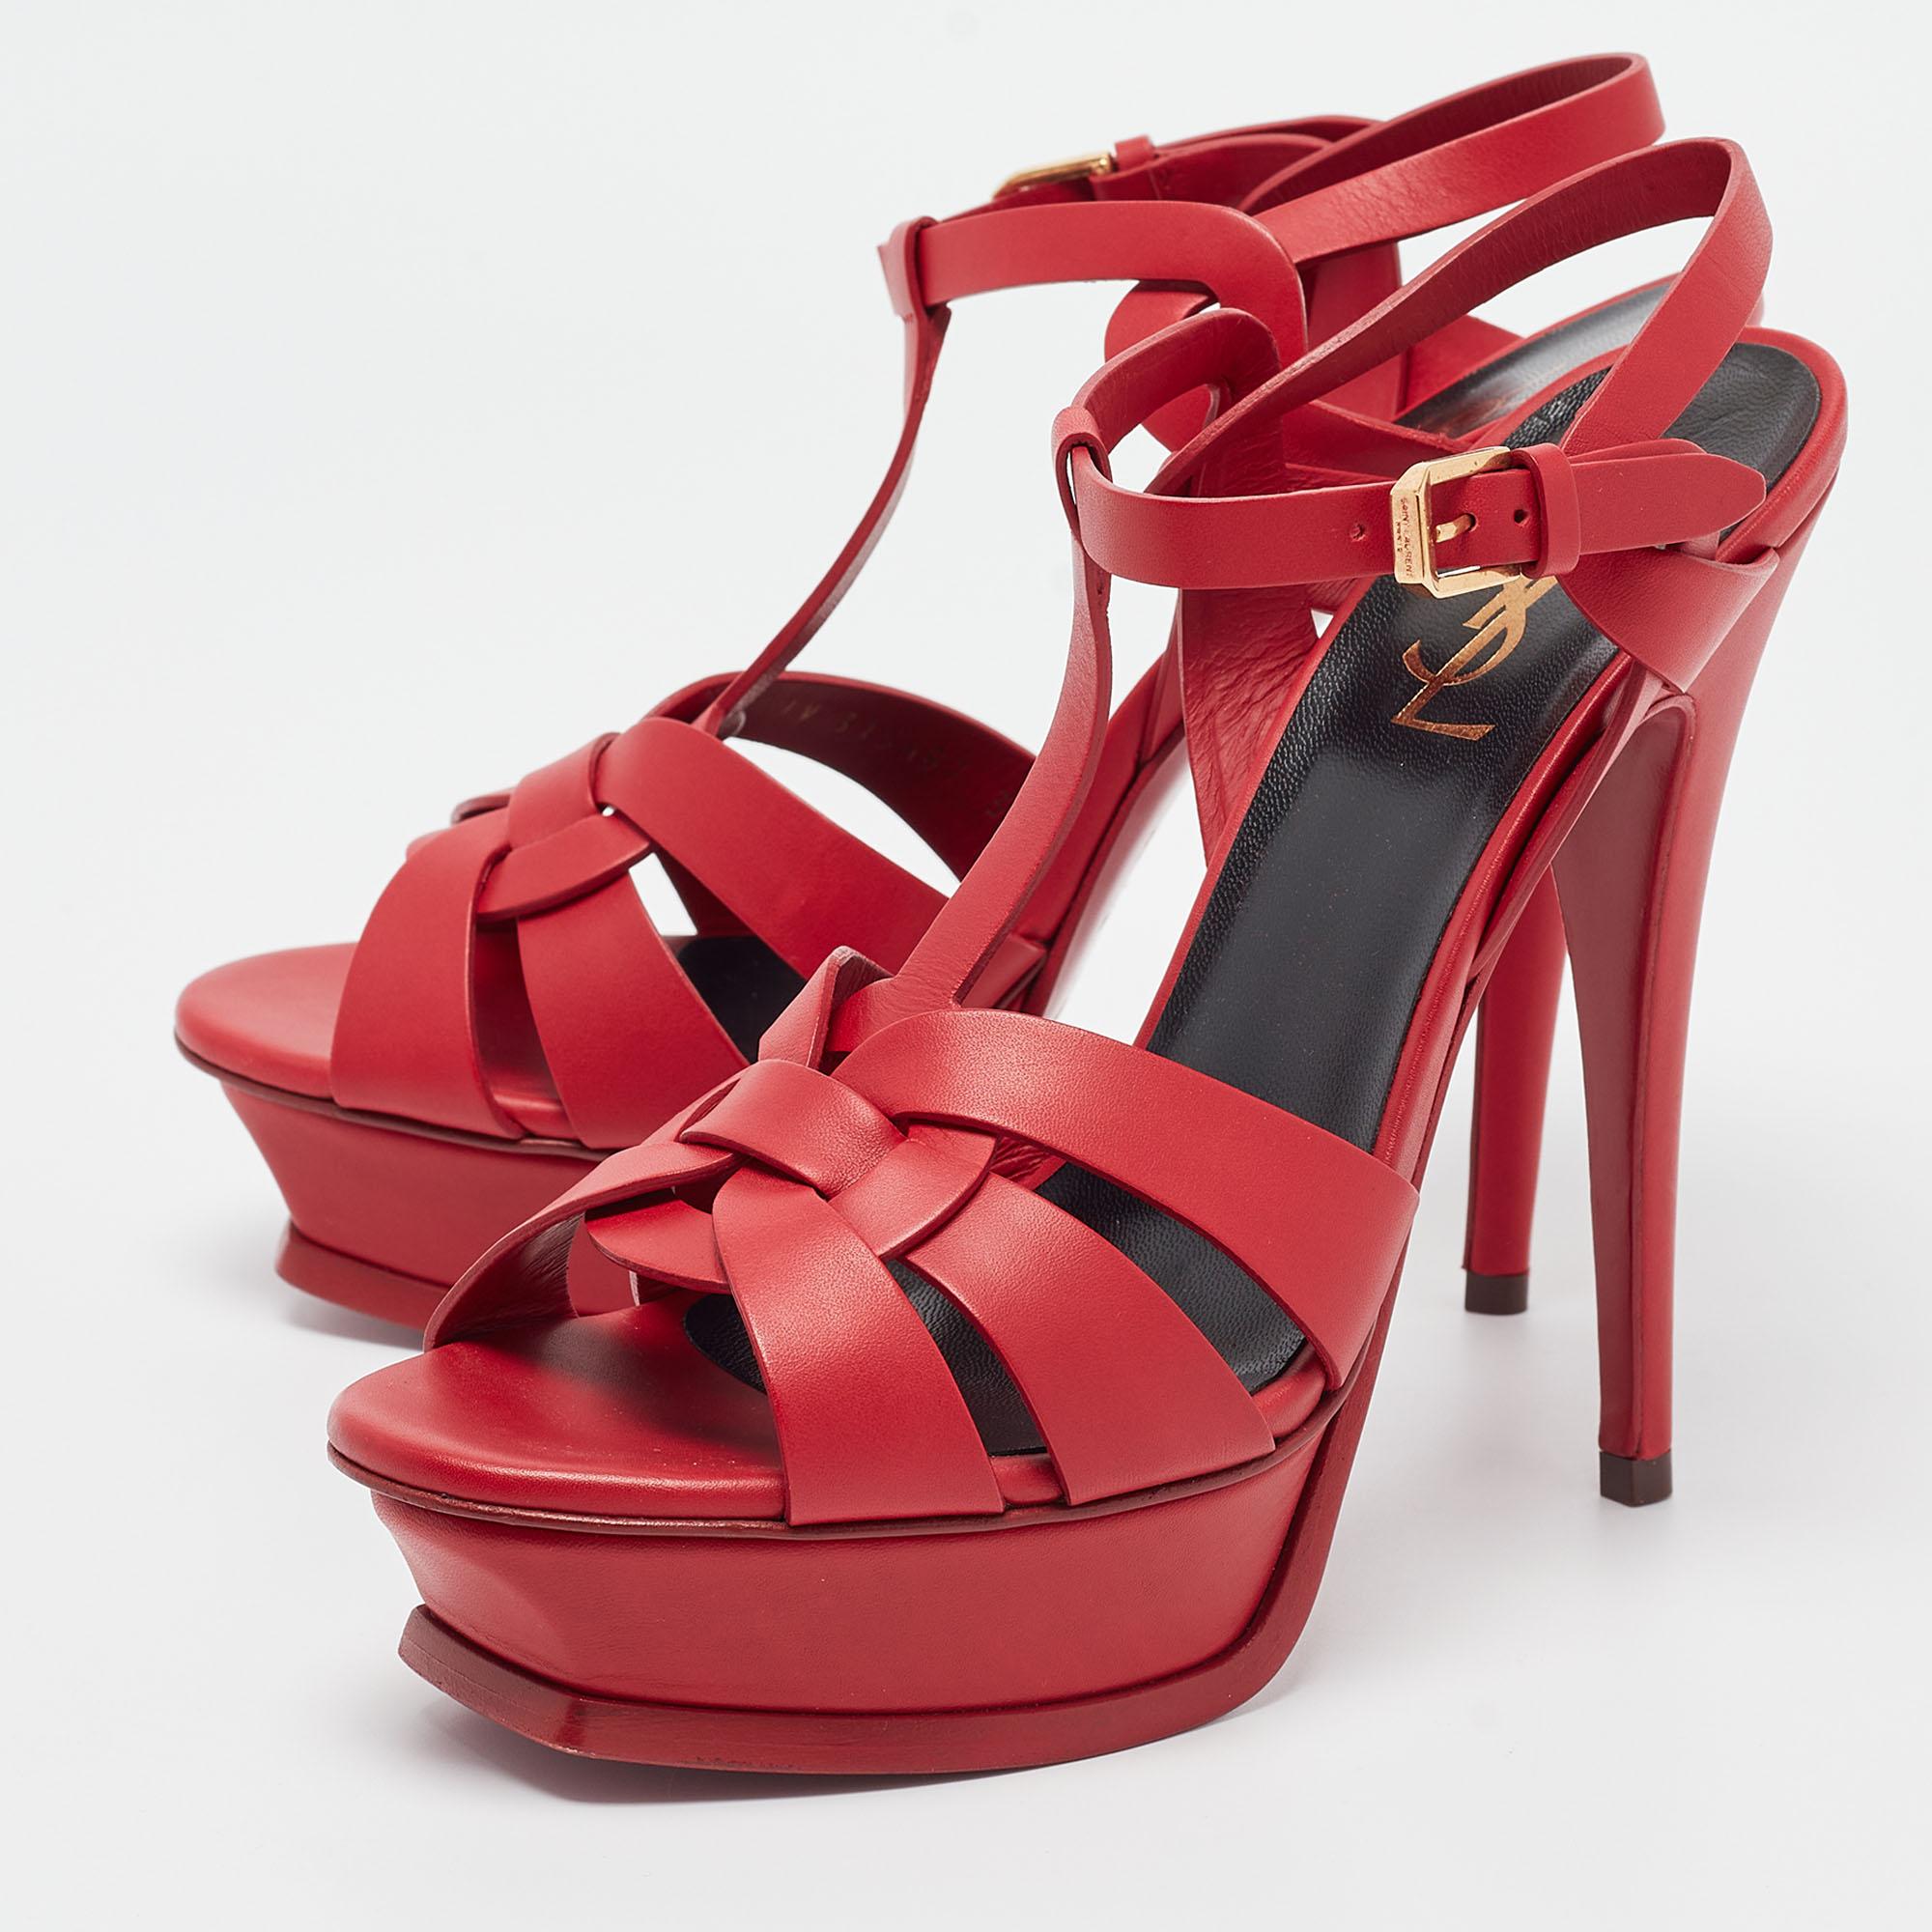 Saint Laurent Red Leather Tribute Sandals Size 38.5 For Sale 4